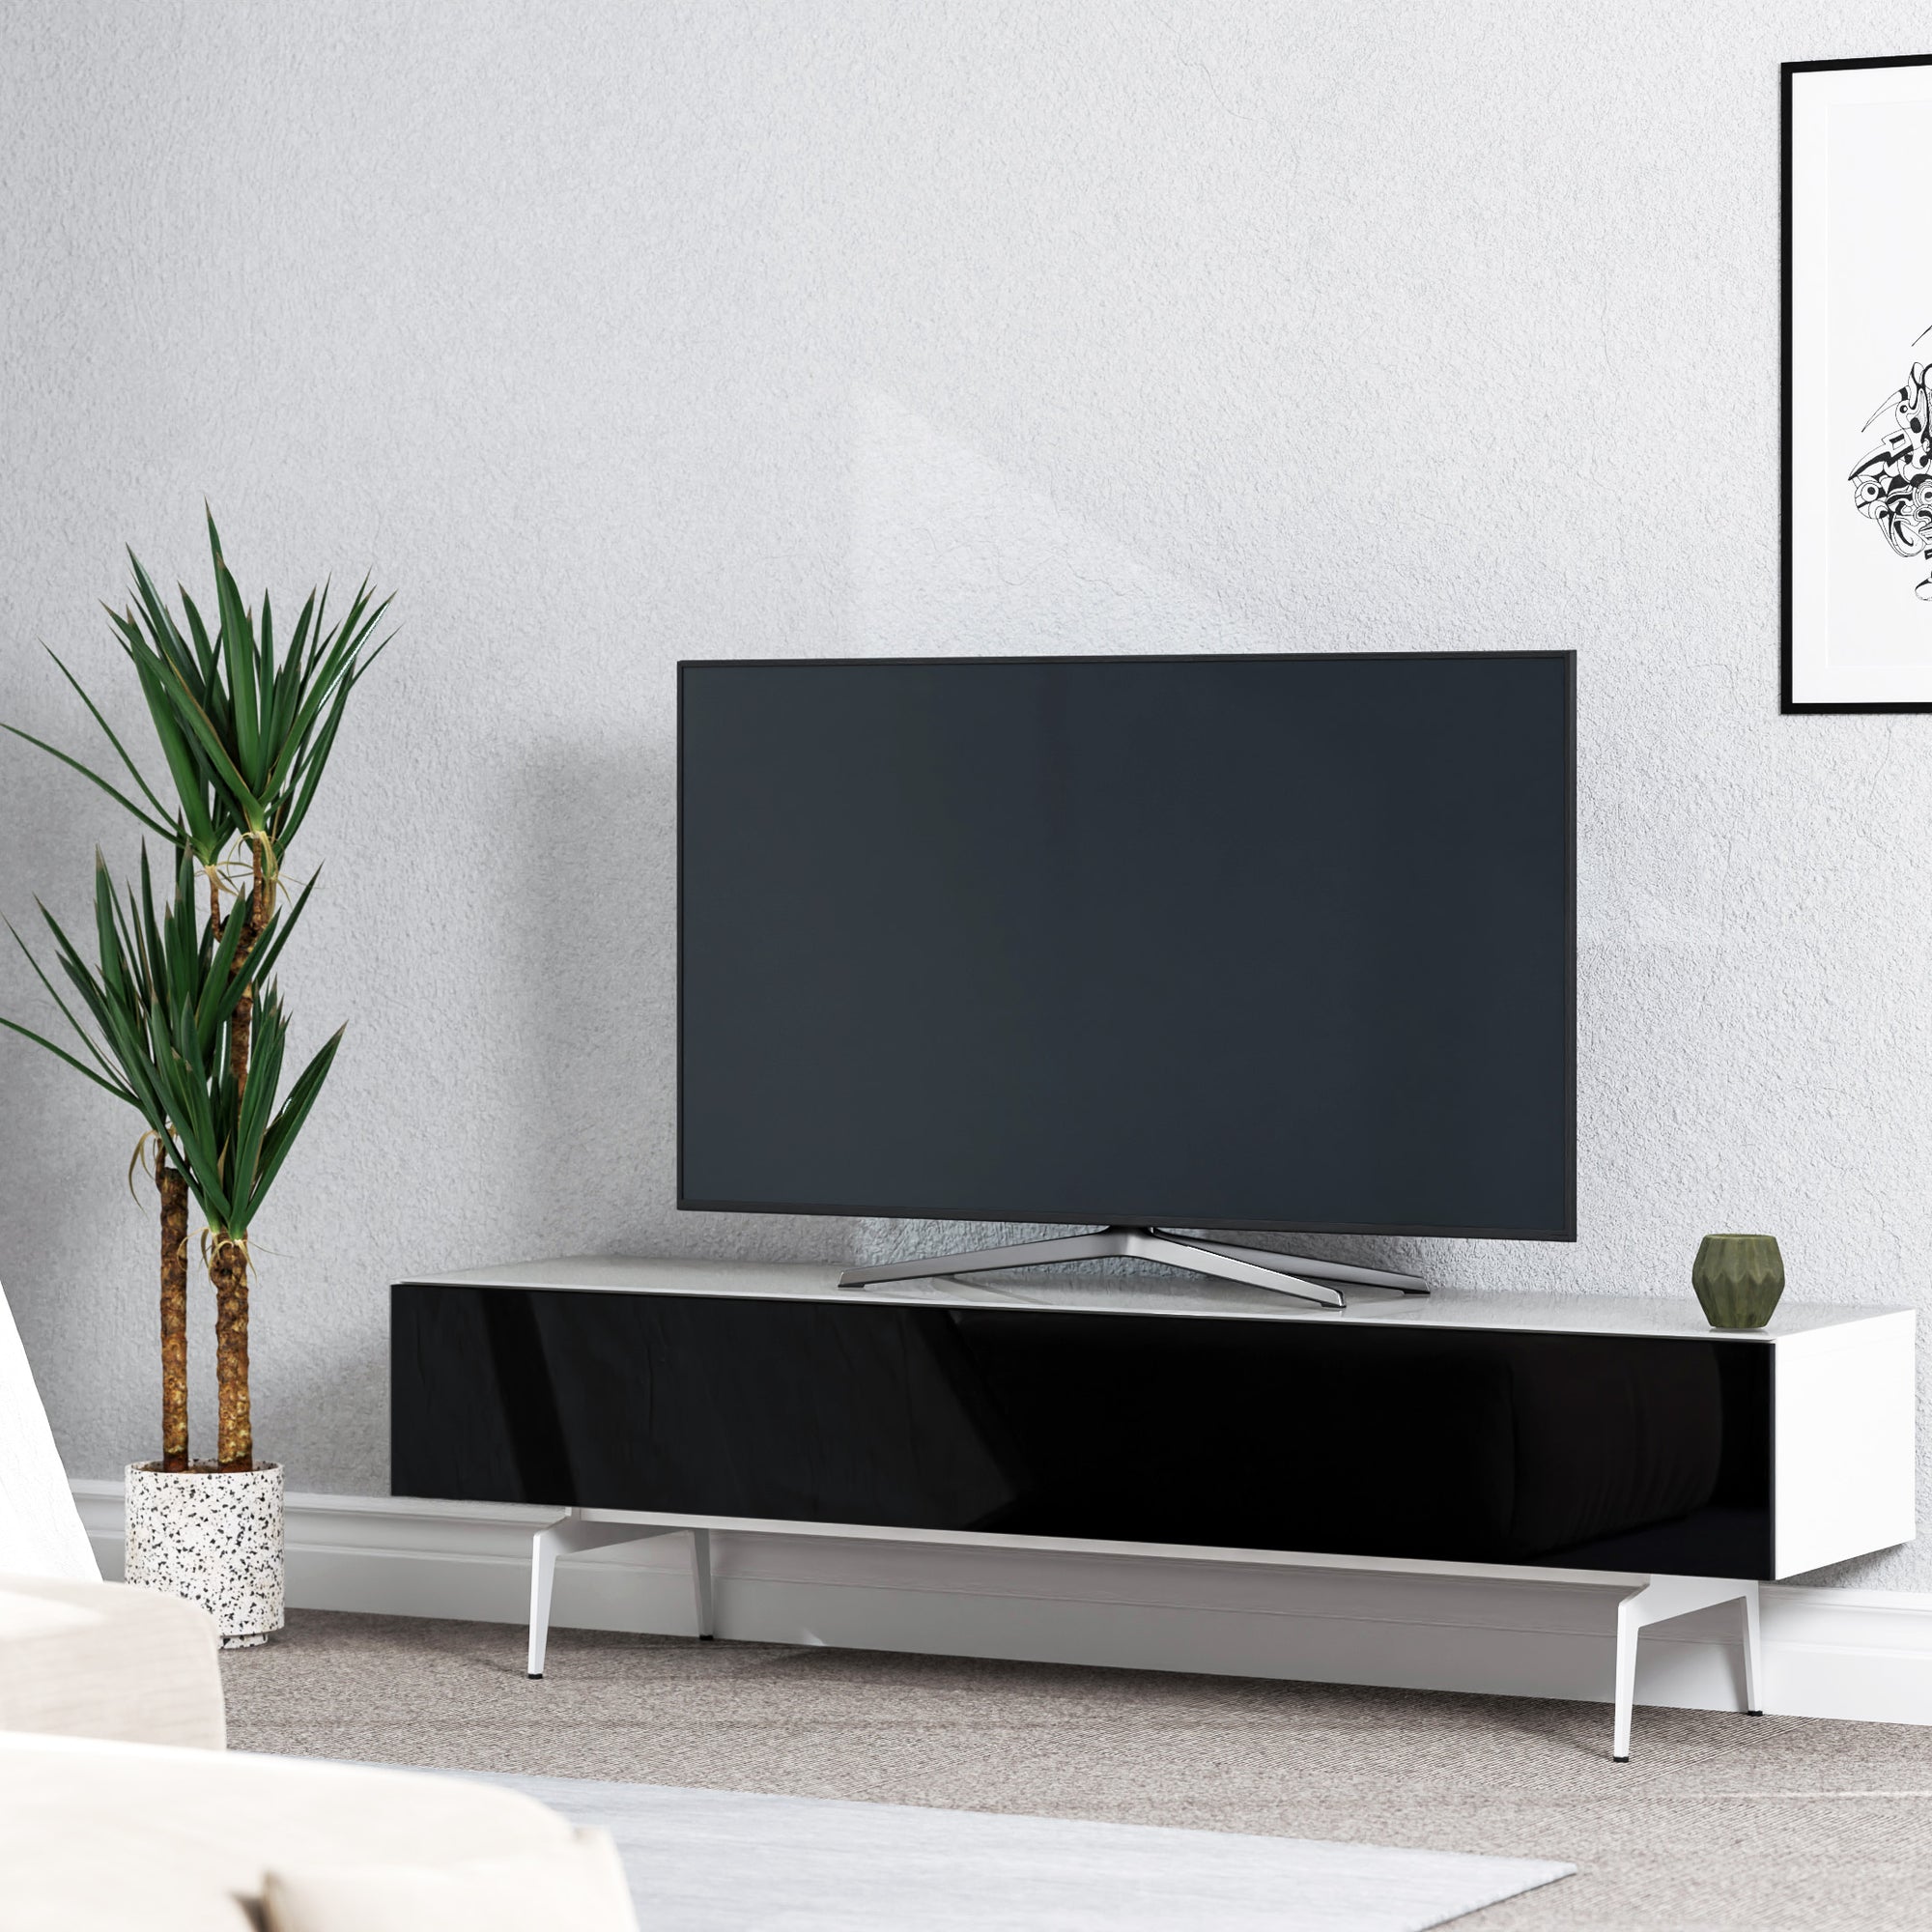 Sonorous Studio ST360 Modern TV Stand w/ Spike Legs for TVs up to 75" - White / Black Wood Cover